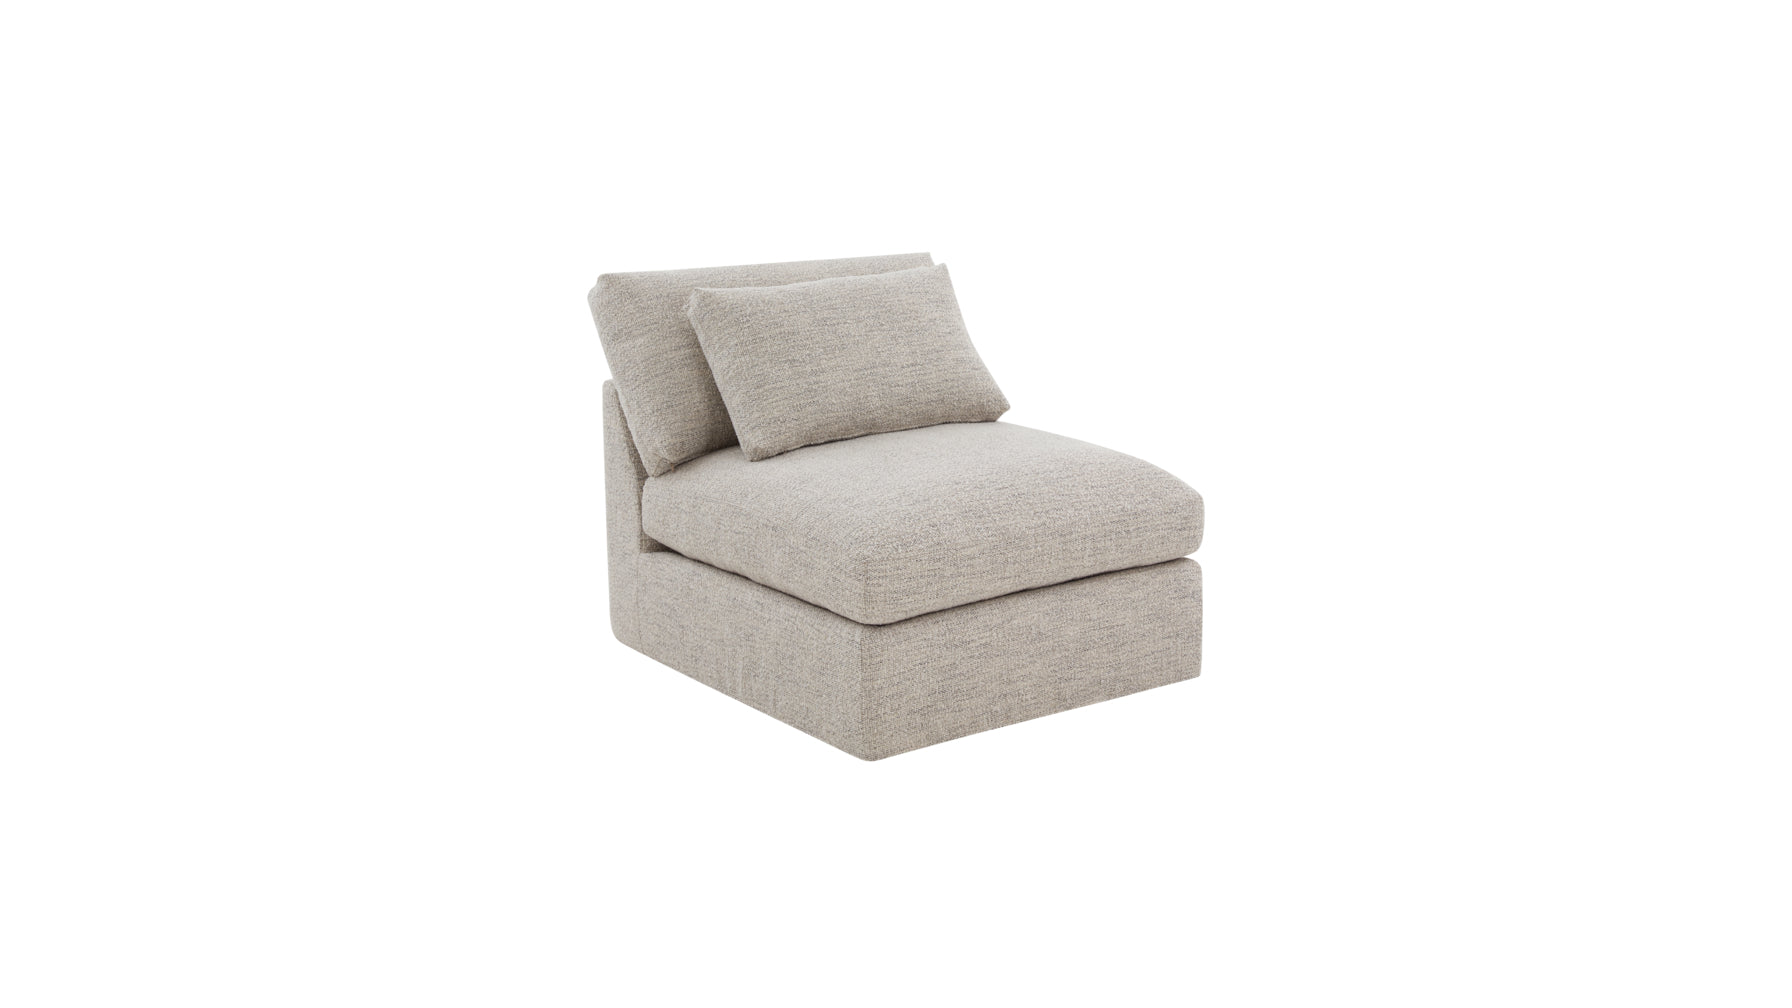 Get Together™ Armless Chair, Large, Oatmeal - Image 2